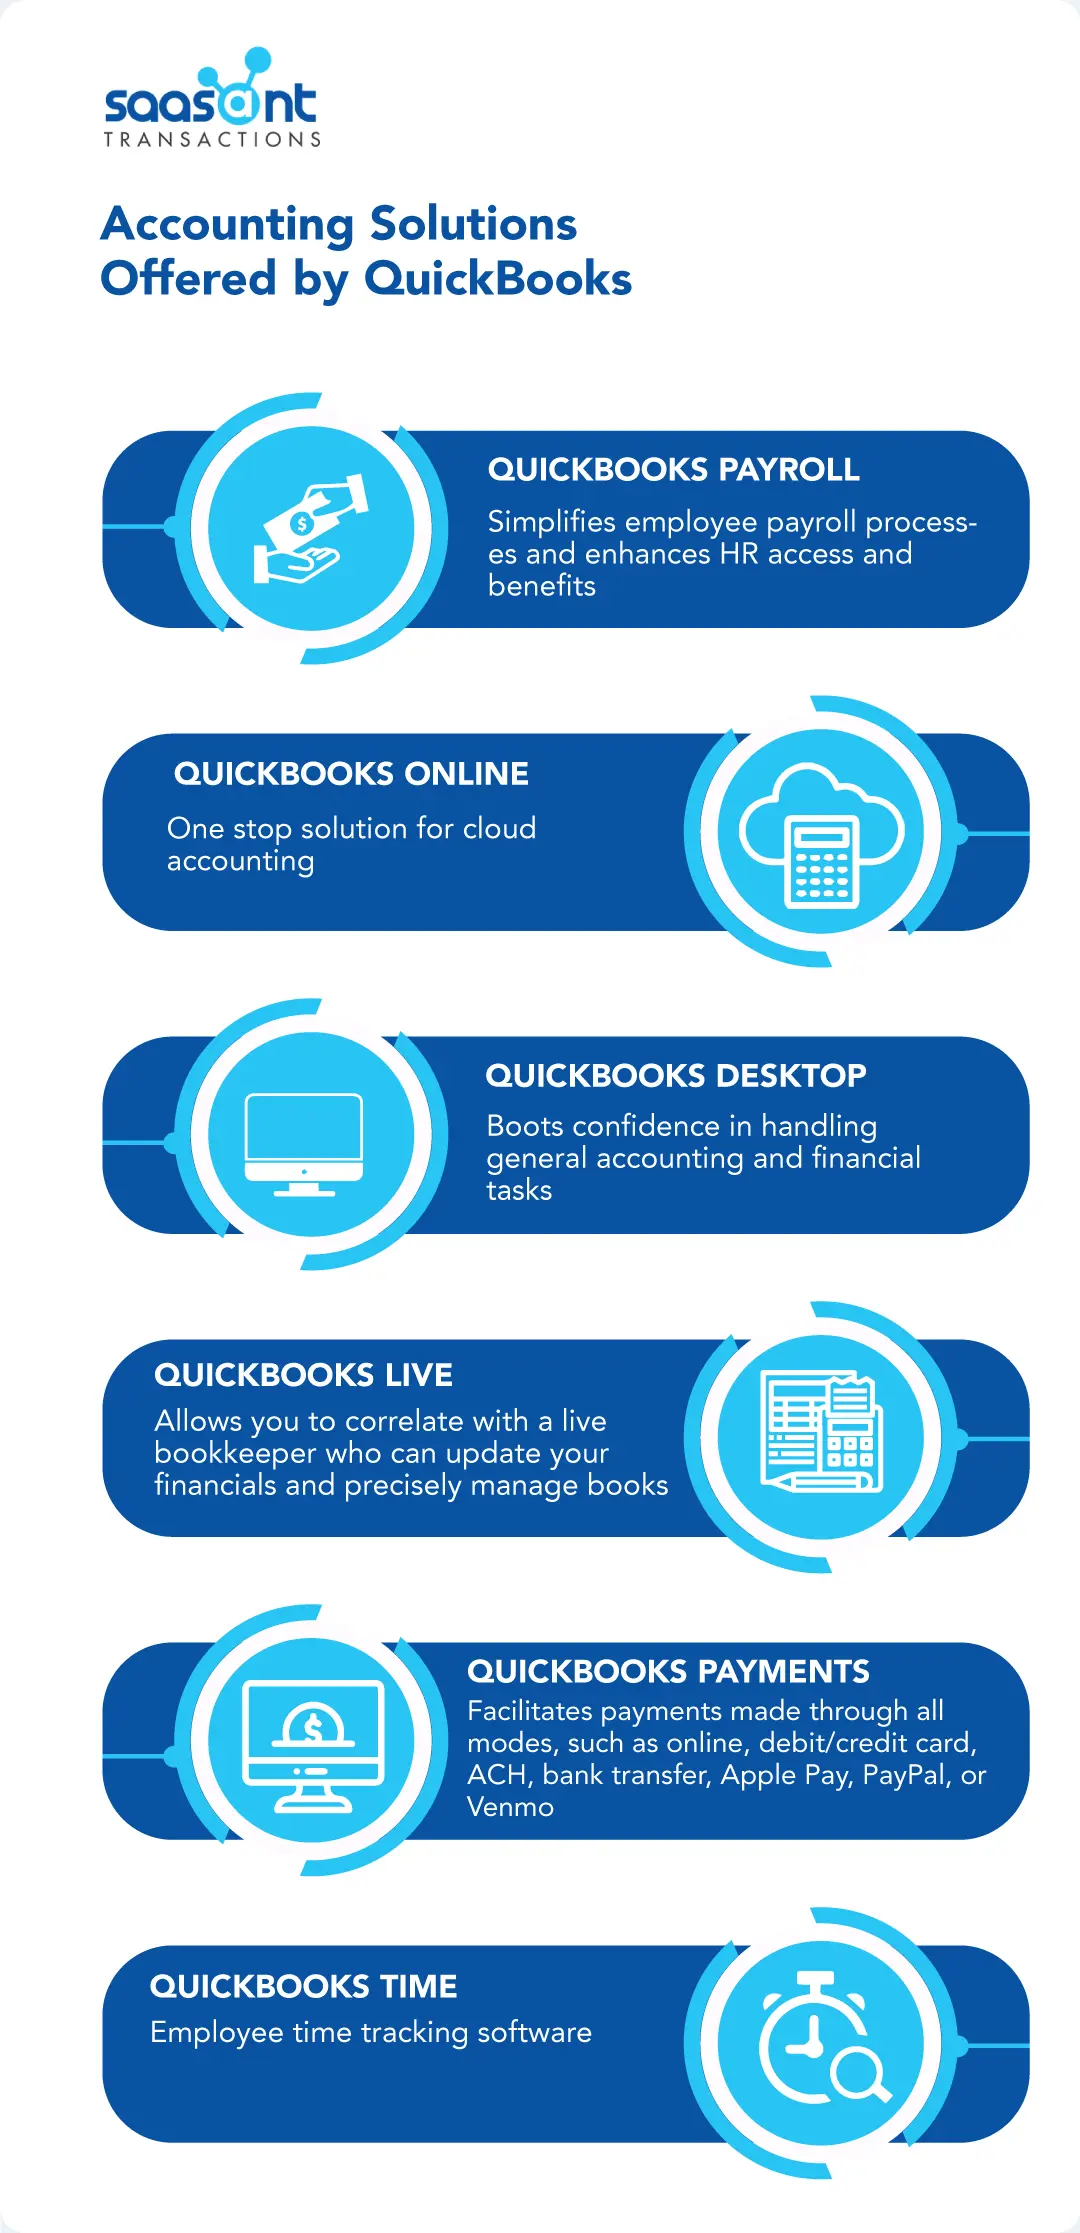 Accounting solutions offered by QuickBooks